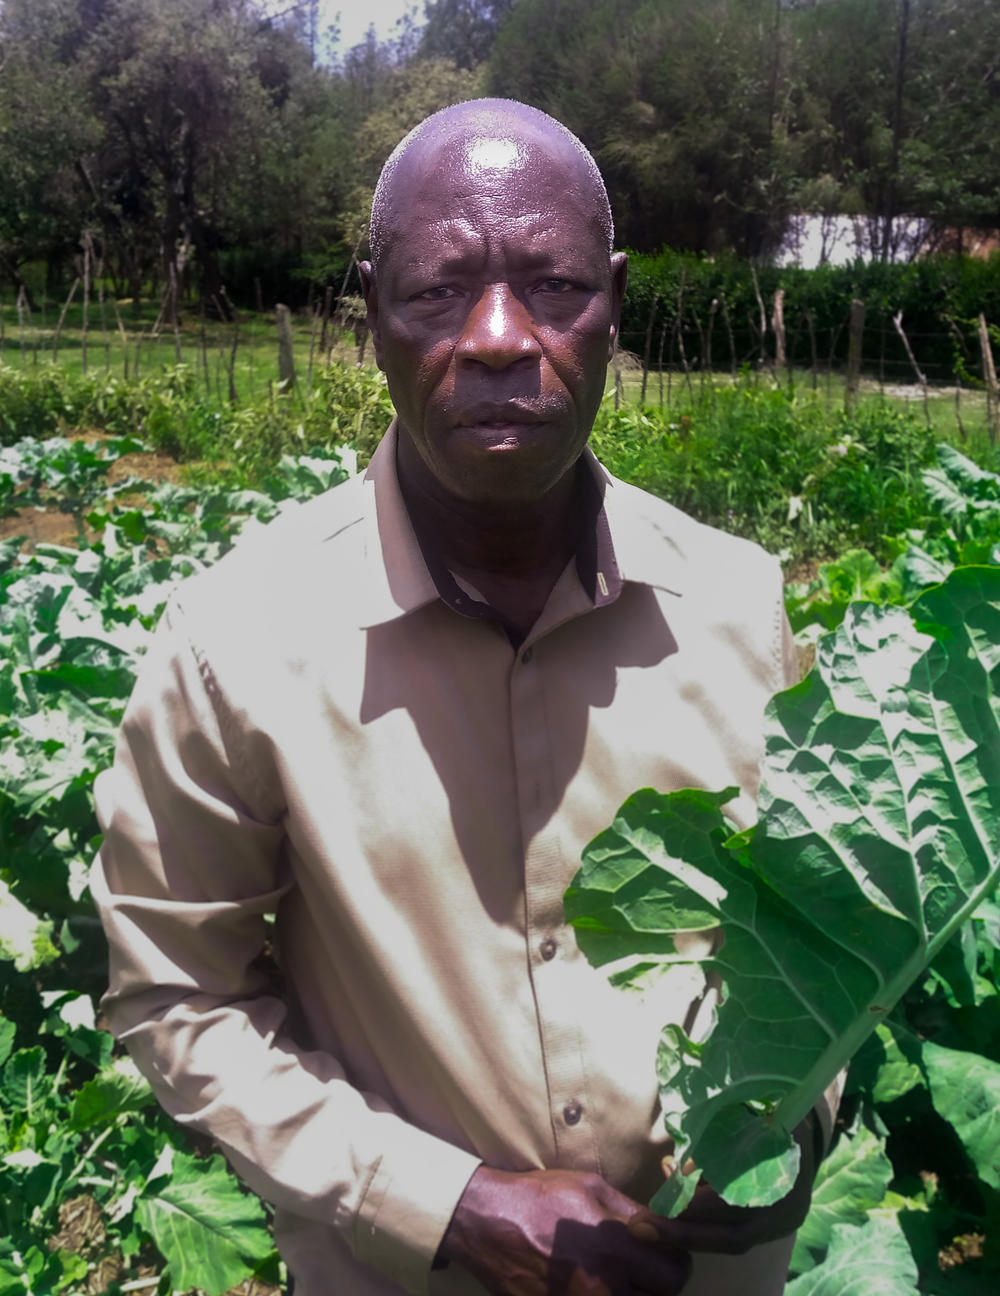 Benard Mwenja's reserve water supply has helped him weather the drought better than many of his neighbors. He is now focusing on more stable crops like kale, carrots and onions instead of relying only on corn with its fluctuating prices.